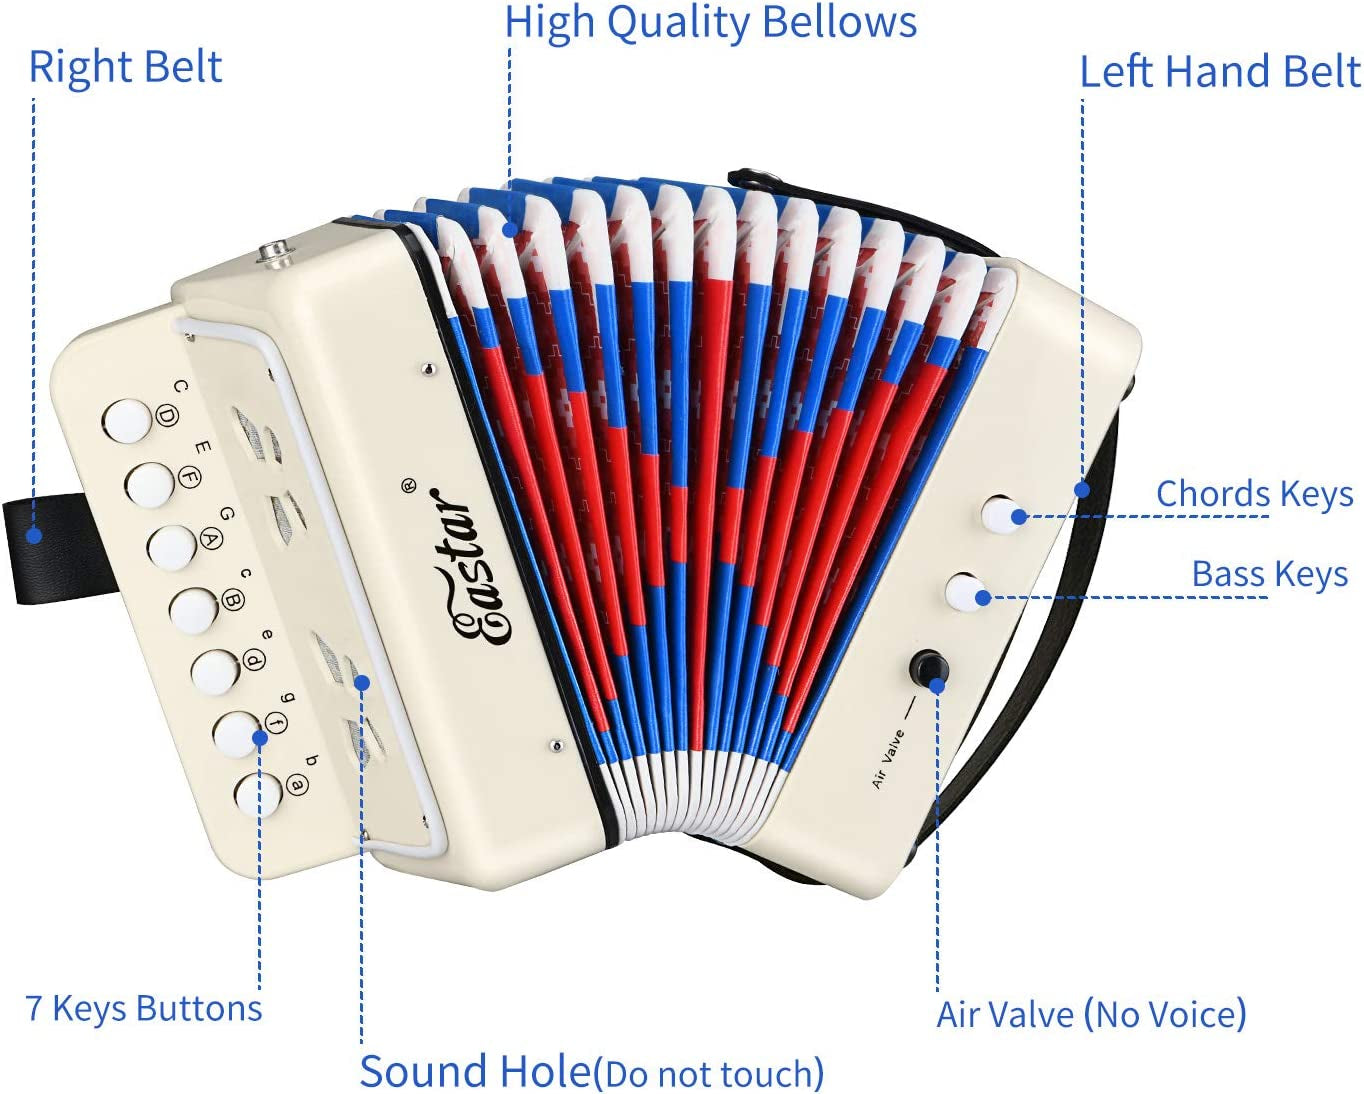 Children's Mini Accordion Toy - 10 Key Button Musical Instrument for Kids, Toddlers, and Beginners (White)